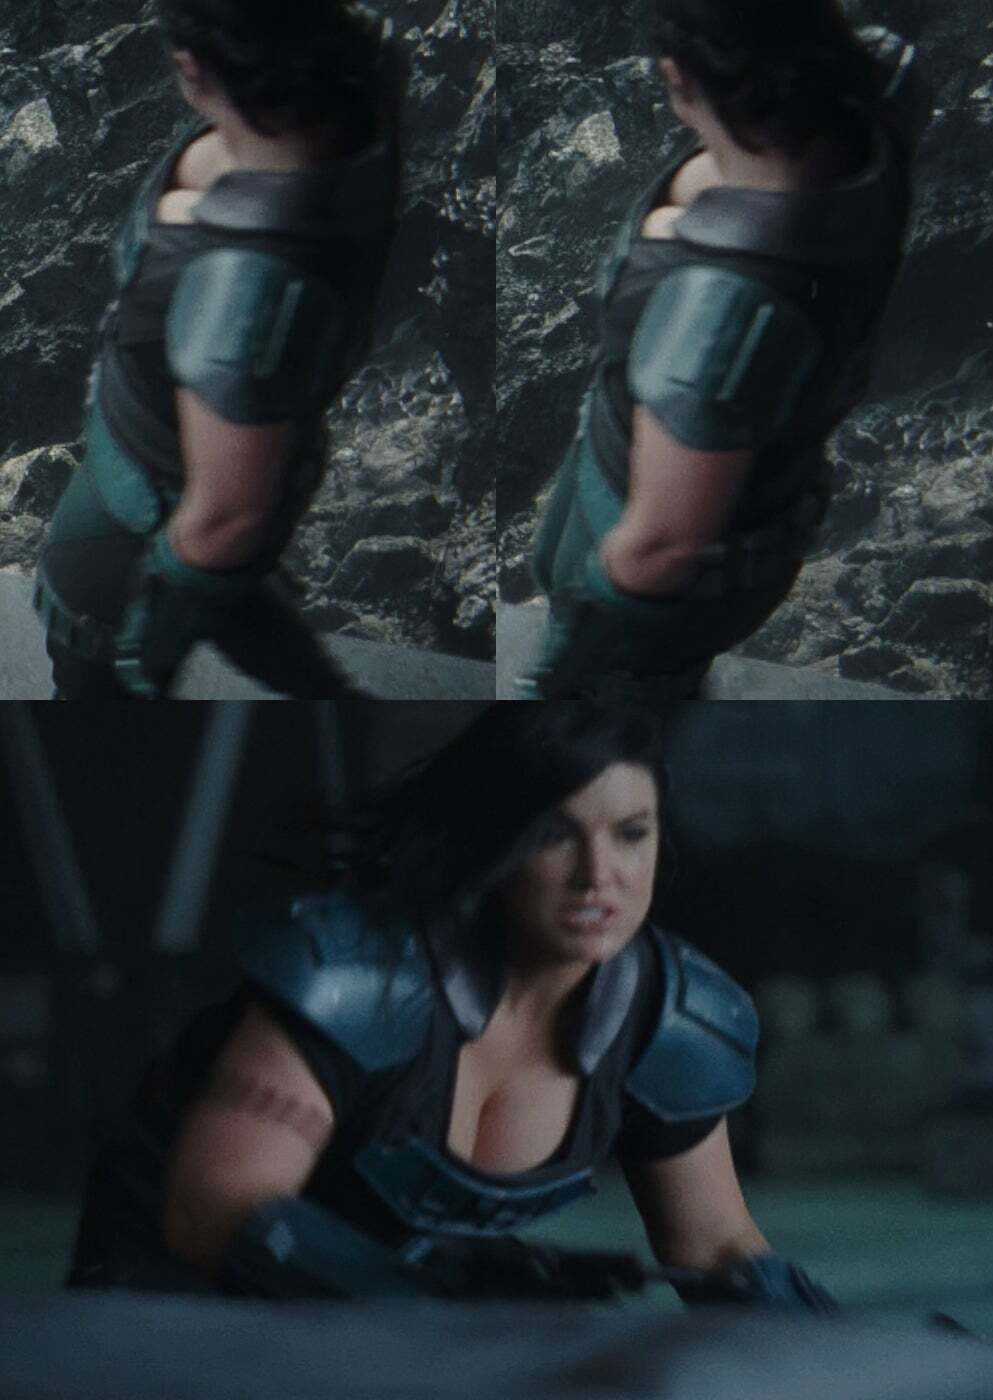 Cara Dune must've been the most used fucktoy in the rebel army with tits like that. (Gina Carano)